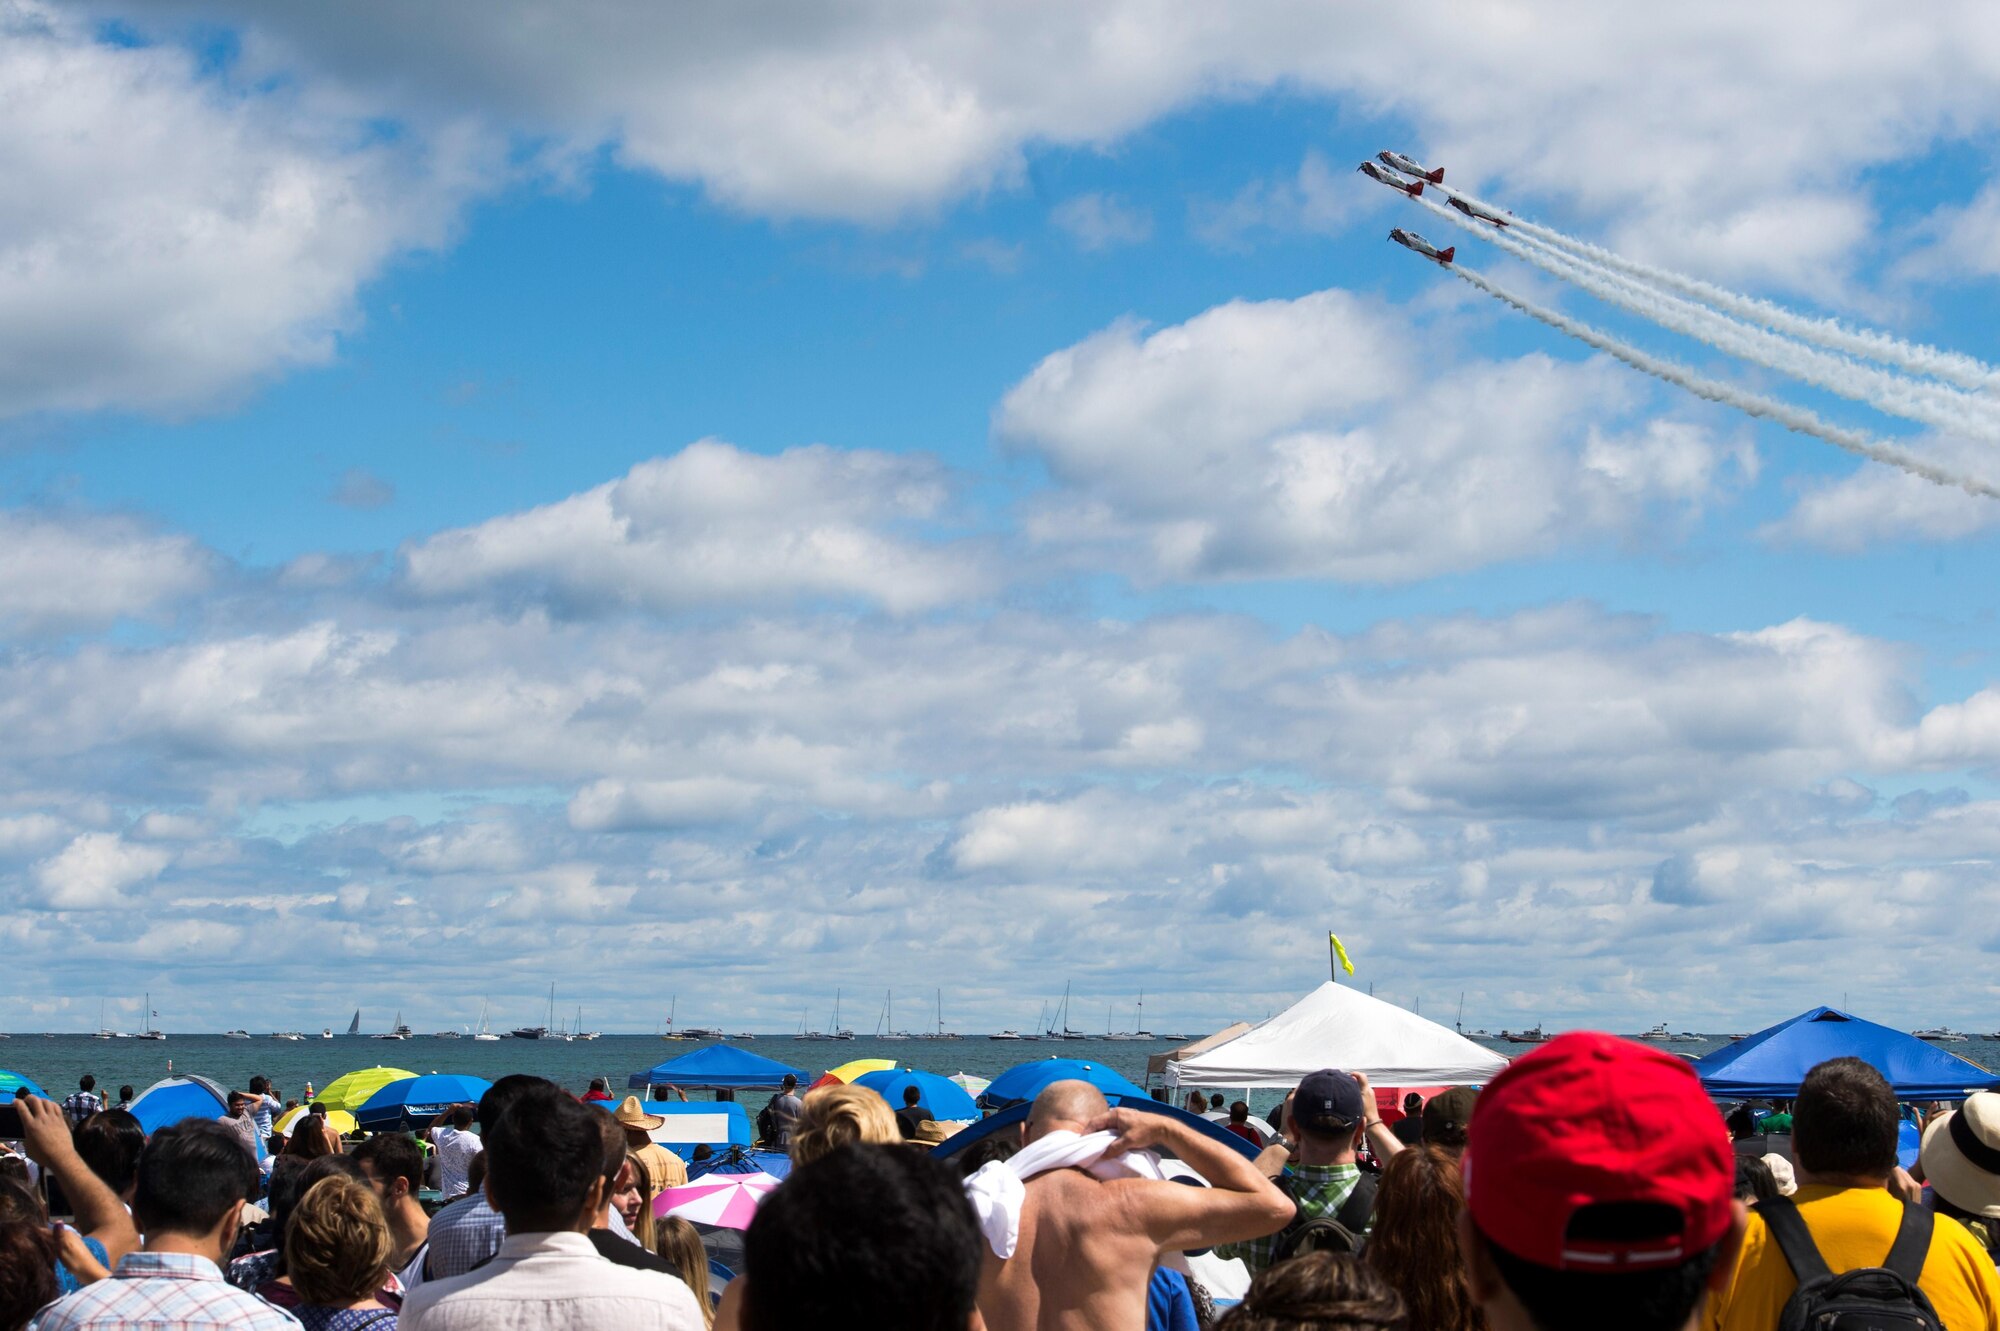 A crowd watches as the AeroShell Acrobatic Team performs aerial stunts during the 58th Annual Chicago Air and Water Show on the shoreline of Lake Michigan in Chicago, Ill., Aug. 21, 2016. The show’s headliners were the USAF Thunderbirds, U.S. Army Golden Knights and the U.S. Navy Leap Frogs. (U.S. Air Force photo by Senior Airman Ryan J. Sonnier)